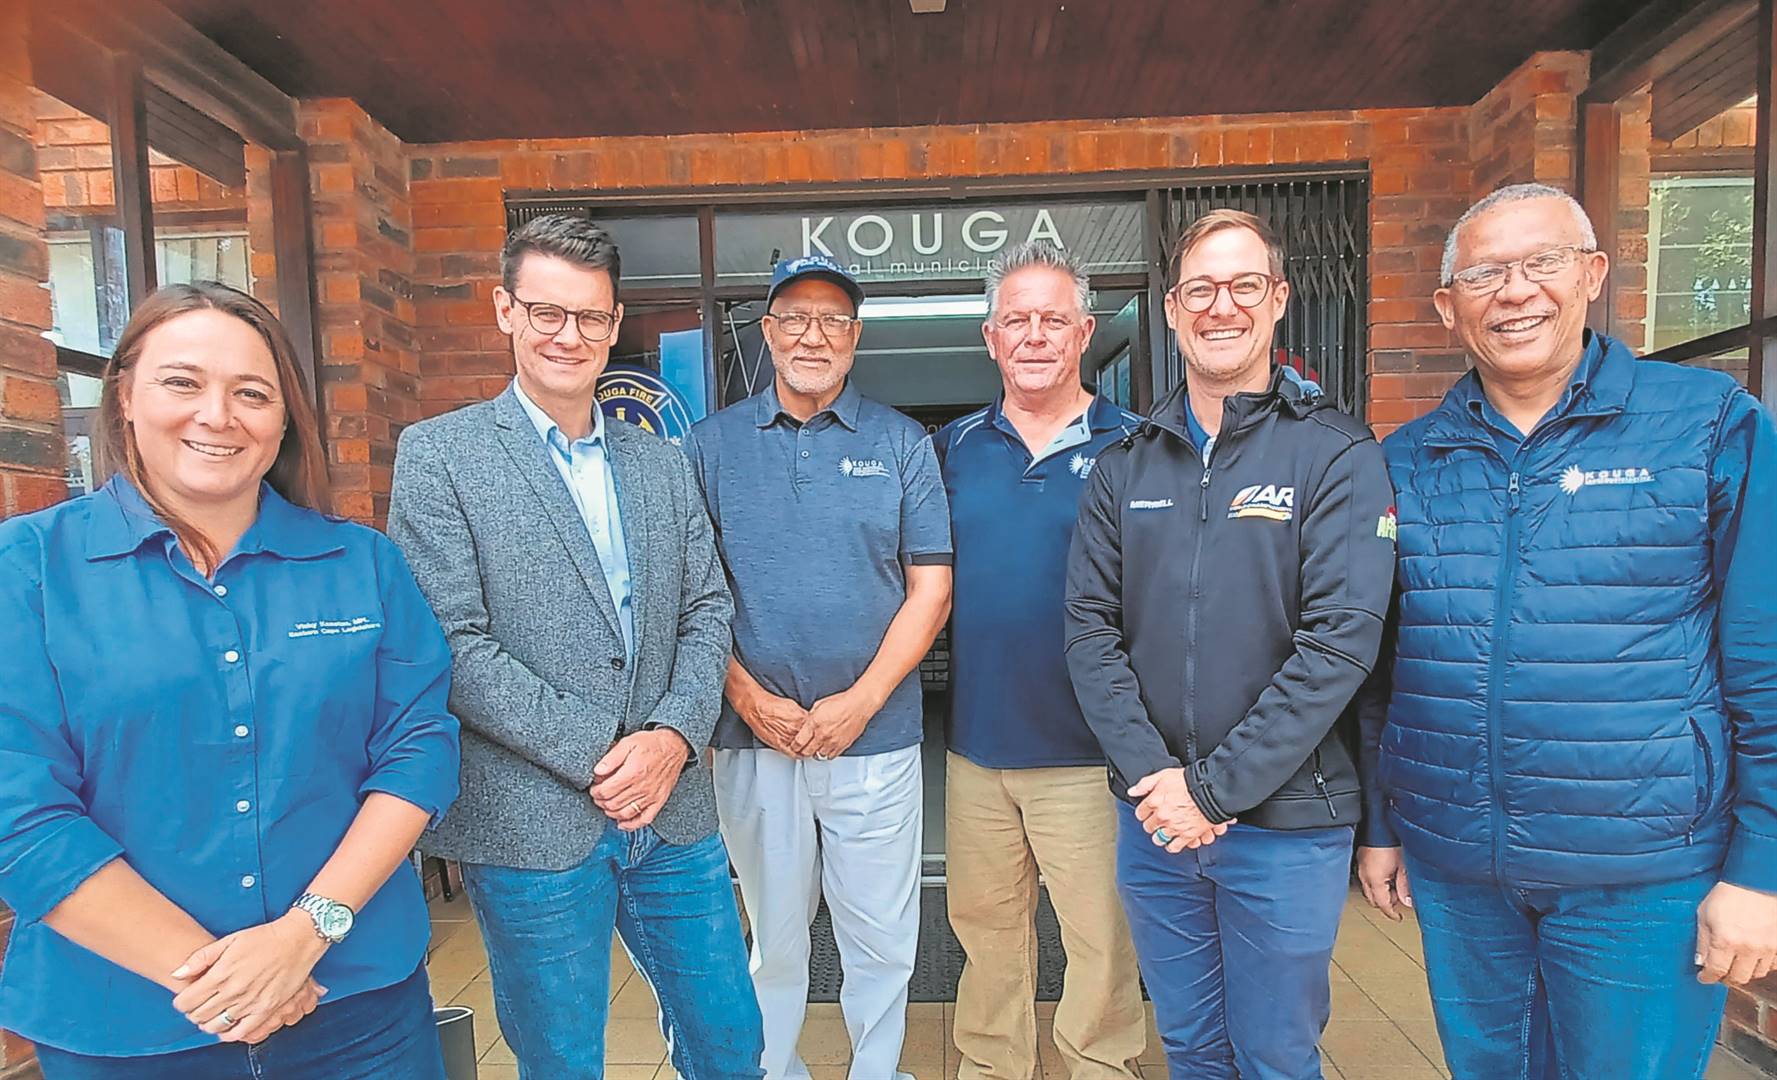 From left are dr Vicky Knoetze MPL (Tsitsi-Kouga Constituency Leader), Andrew Whitfield MP (DA Eastern Cape provincial leader), Danny Benson (MMC for Safety and Security), David Phelan (manager of Incident Command Centre), Hattingh Bornman (Kouga executive mayor) and Timothy Jantjes (Kouga executive deputy mayor).